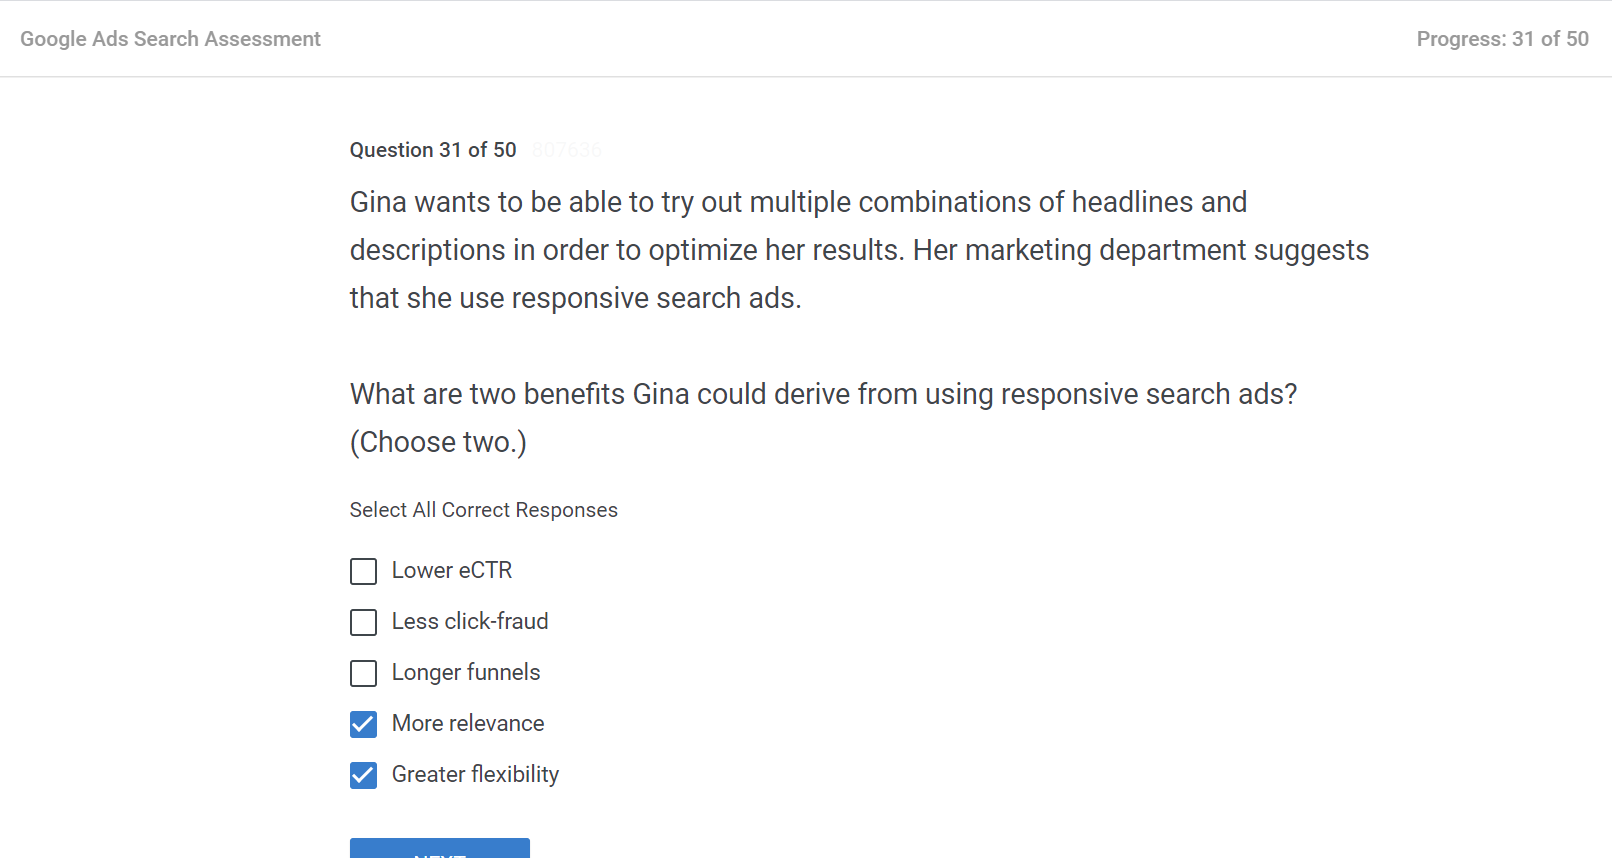 Gina wants to be able to try out multiple combinations of headlines and descriptions in order to optimize her results. Her marketing department suggests that she use responsive search ads. 